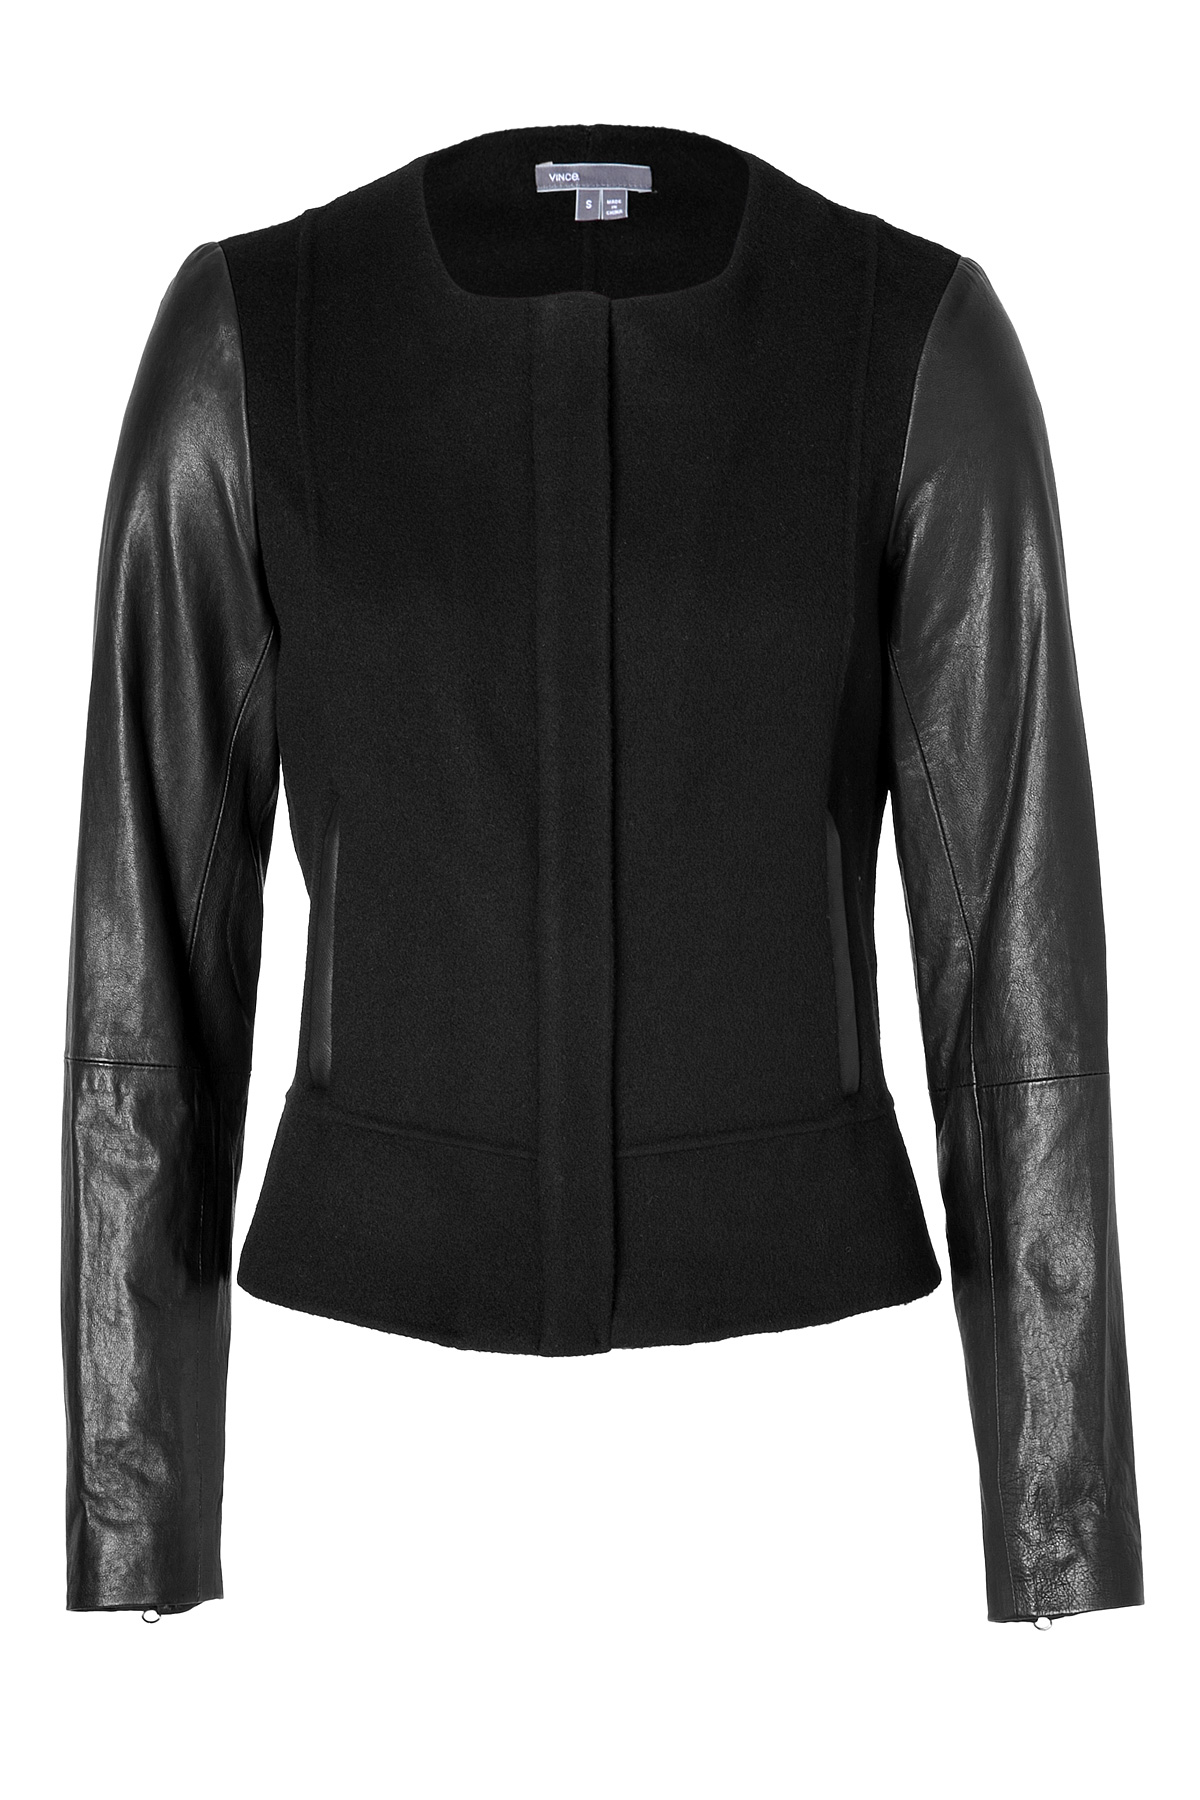 Lyst - Vince Wool Jacket With Leather Sleeves In Black in Black